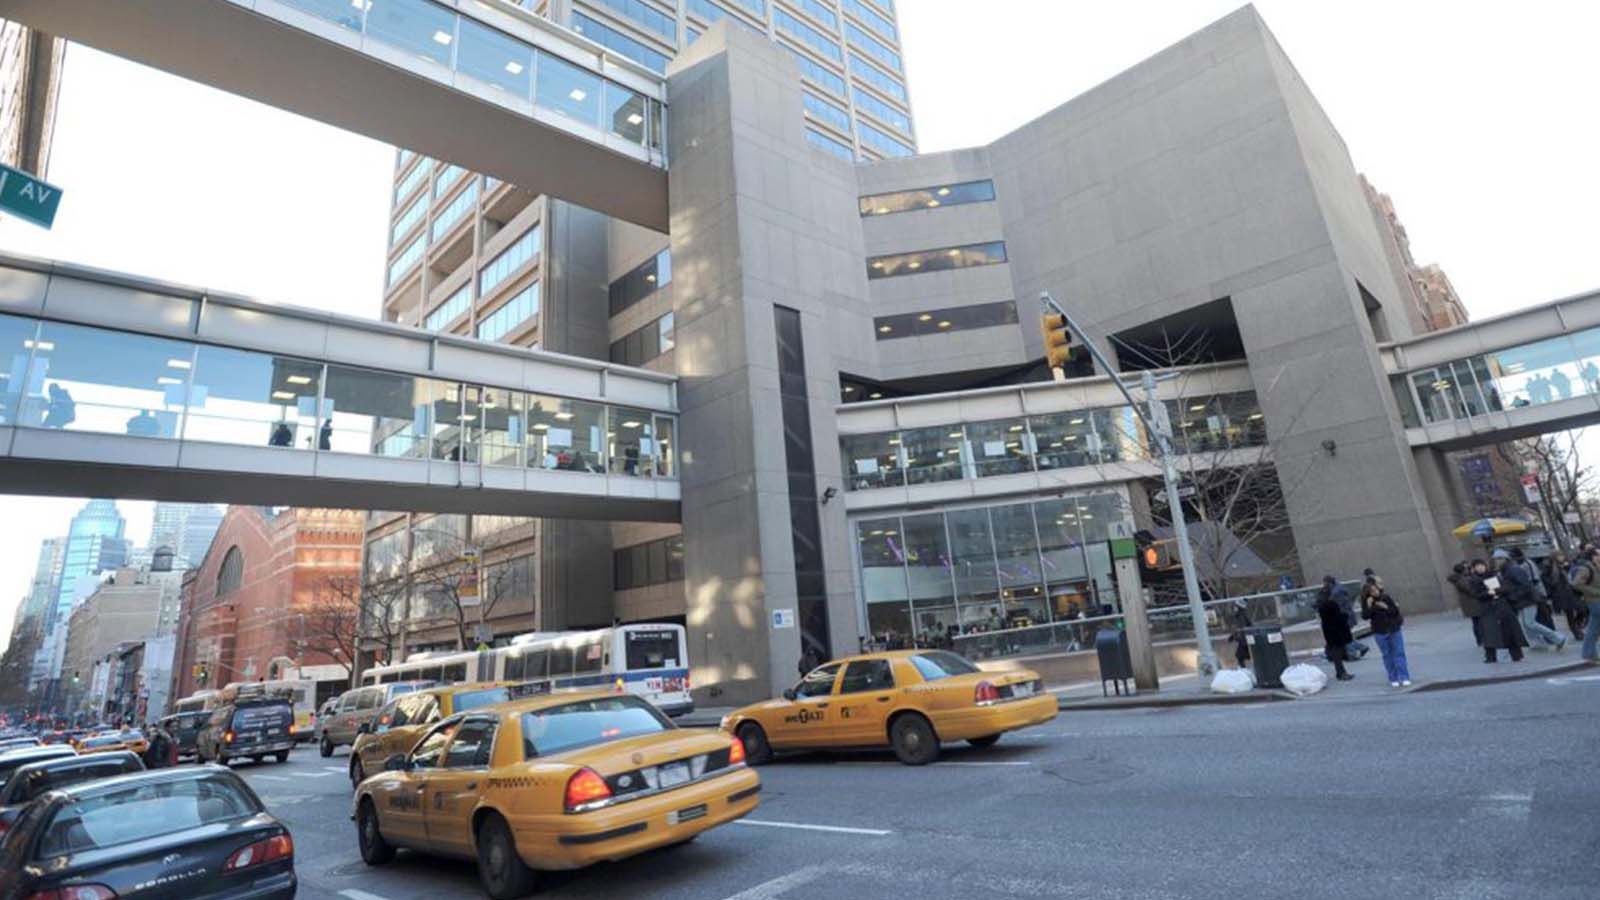 Street view of Hunter College